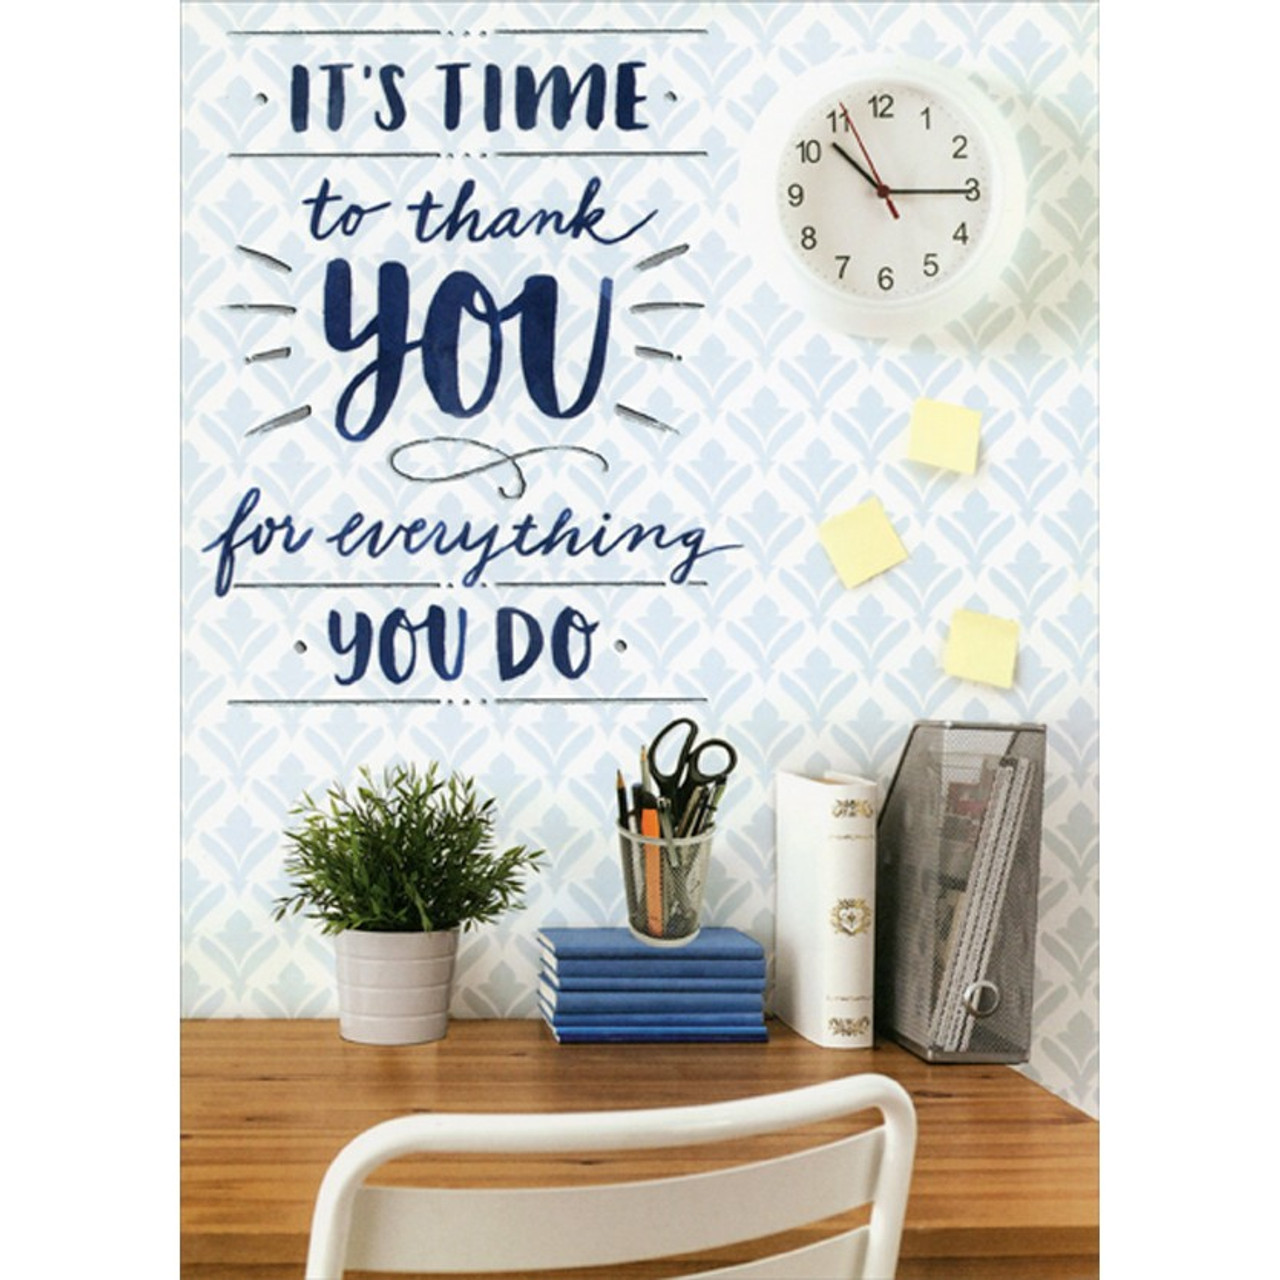 https://cdn11.bigcommerce.com/s-o3ewkiqyx3/images/stencil/1280x1280/products/5597/11609/cd17909-neat-organized-desk-administrative-professionals-day-card__42427.1656374948.jpg?c=1